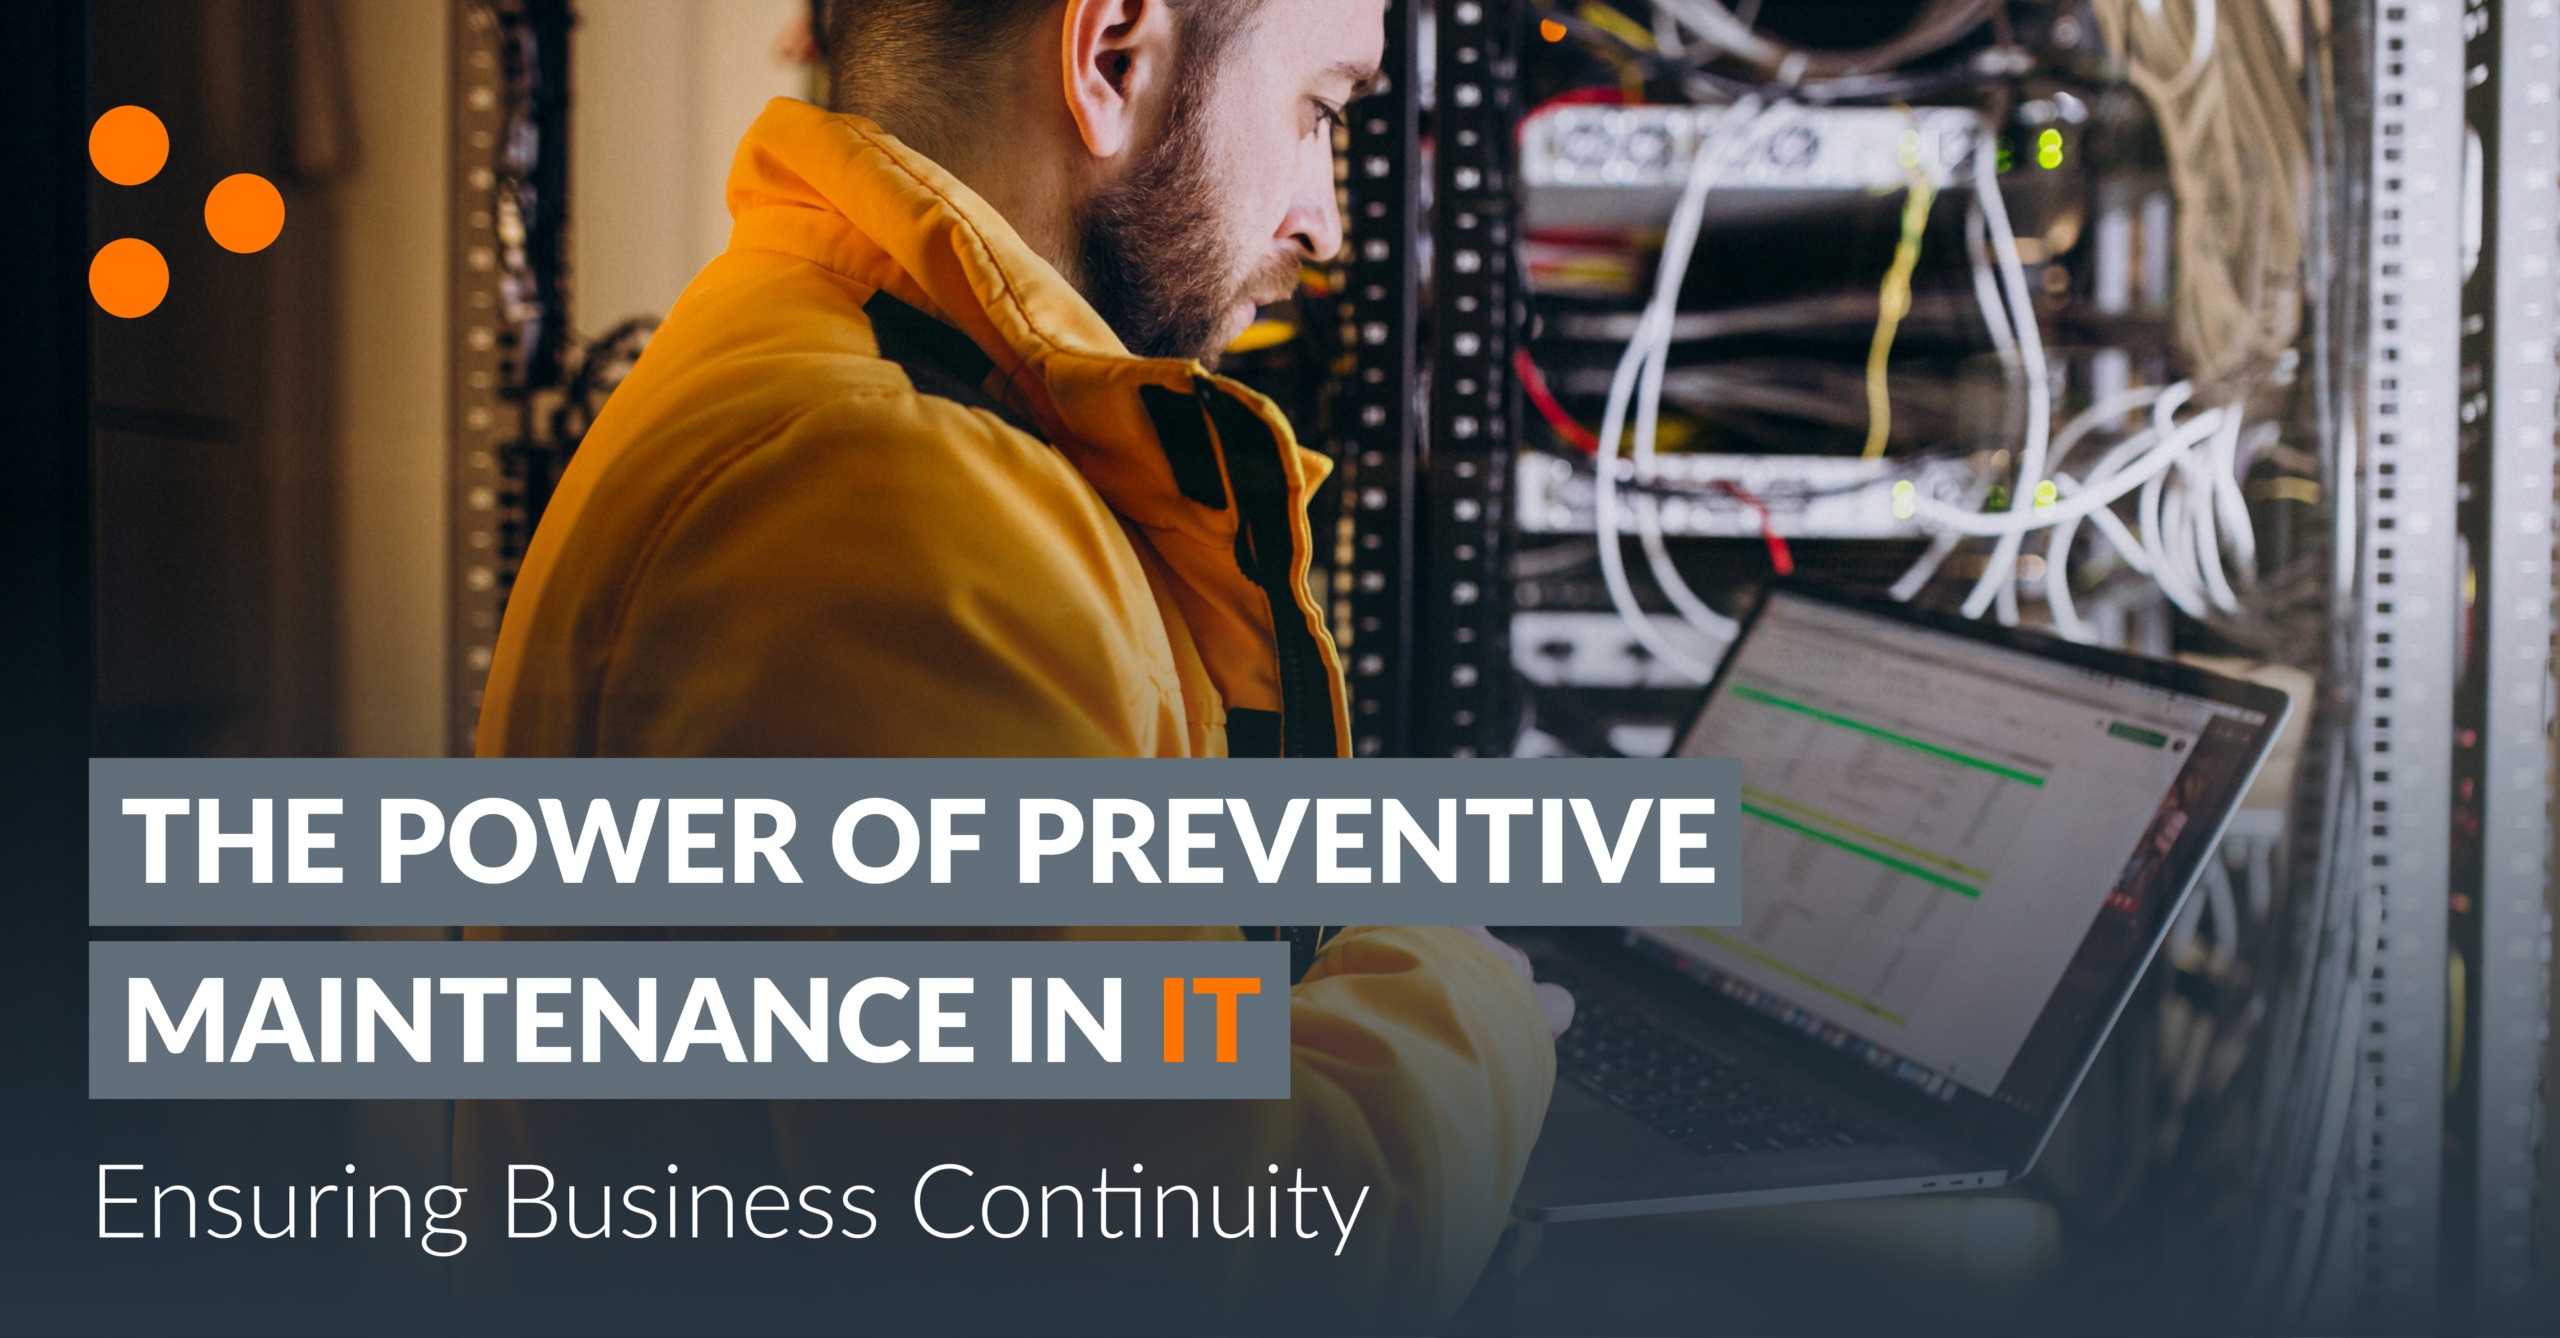 The Power of Preventive Maintenance in IT